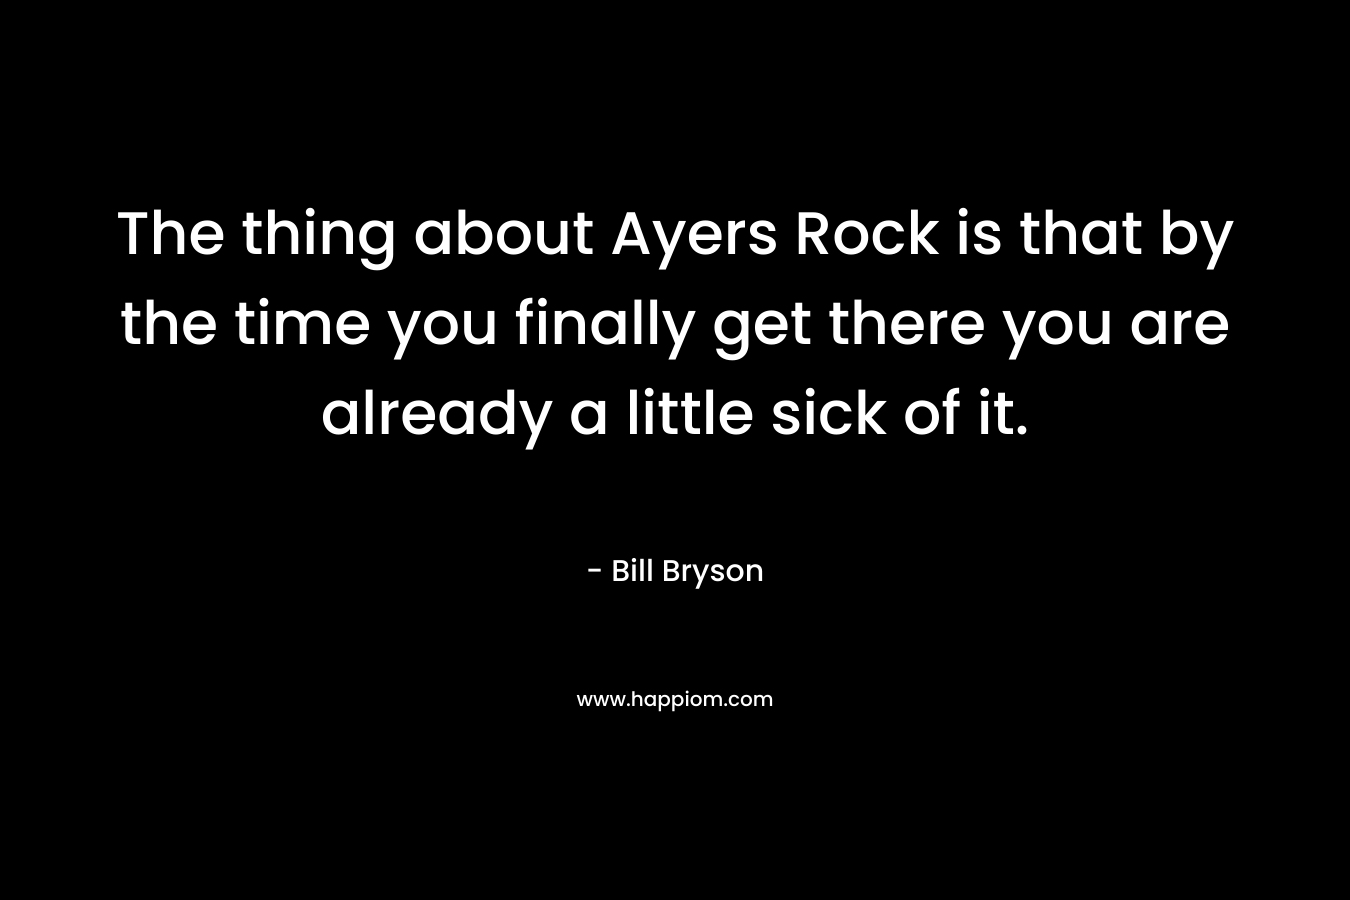 The thing about Ayers Rock is that by the time you finally get there you are already a little sick of it. – Bill Bryson